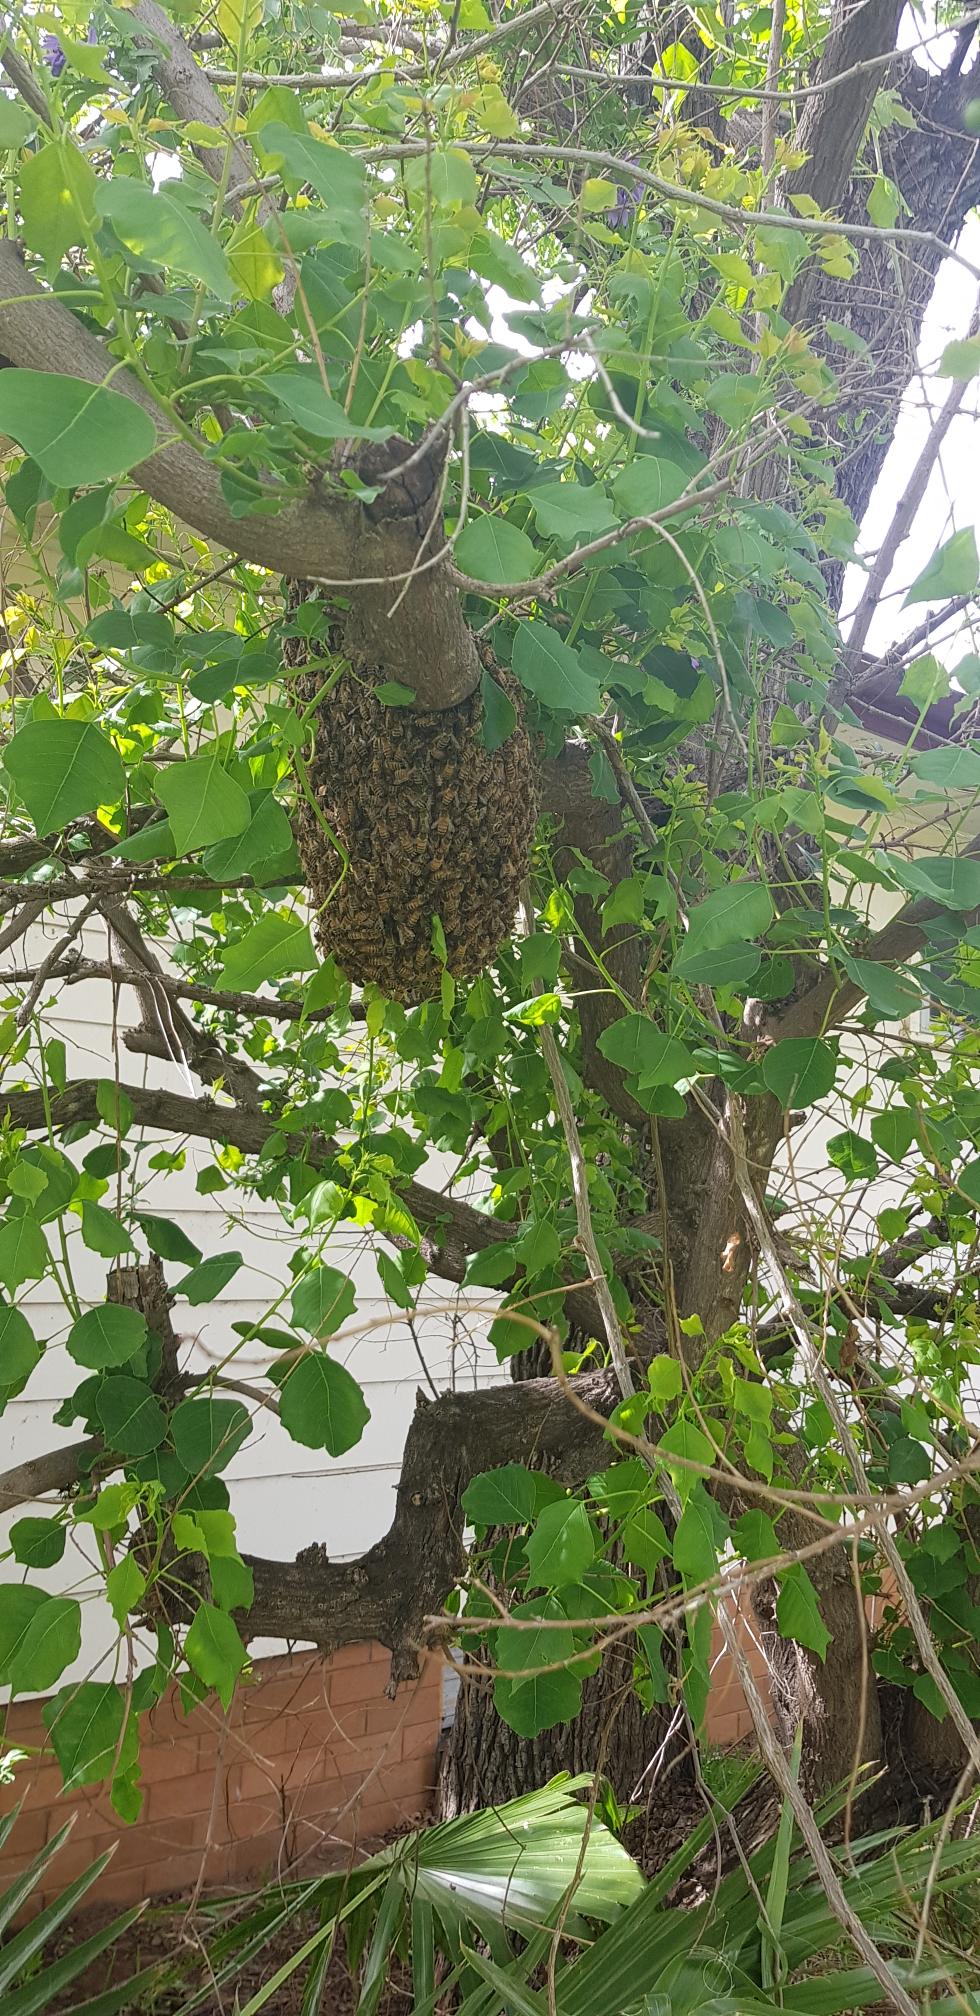 The swarm resting in a tree in Margot Curtis’s backyard.